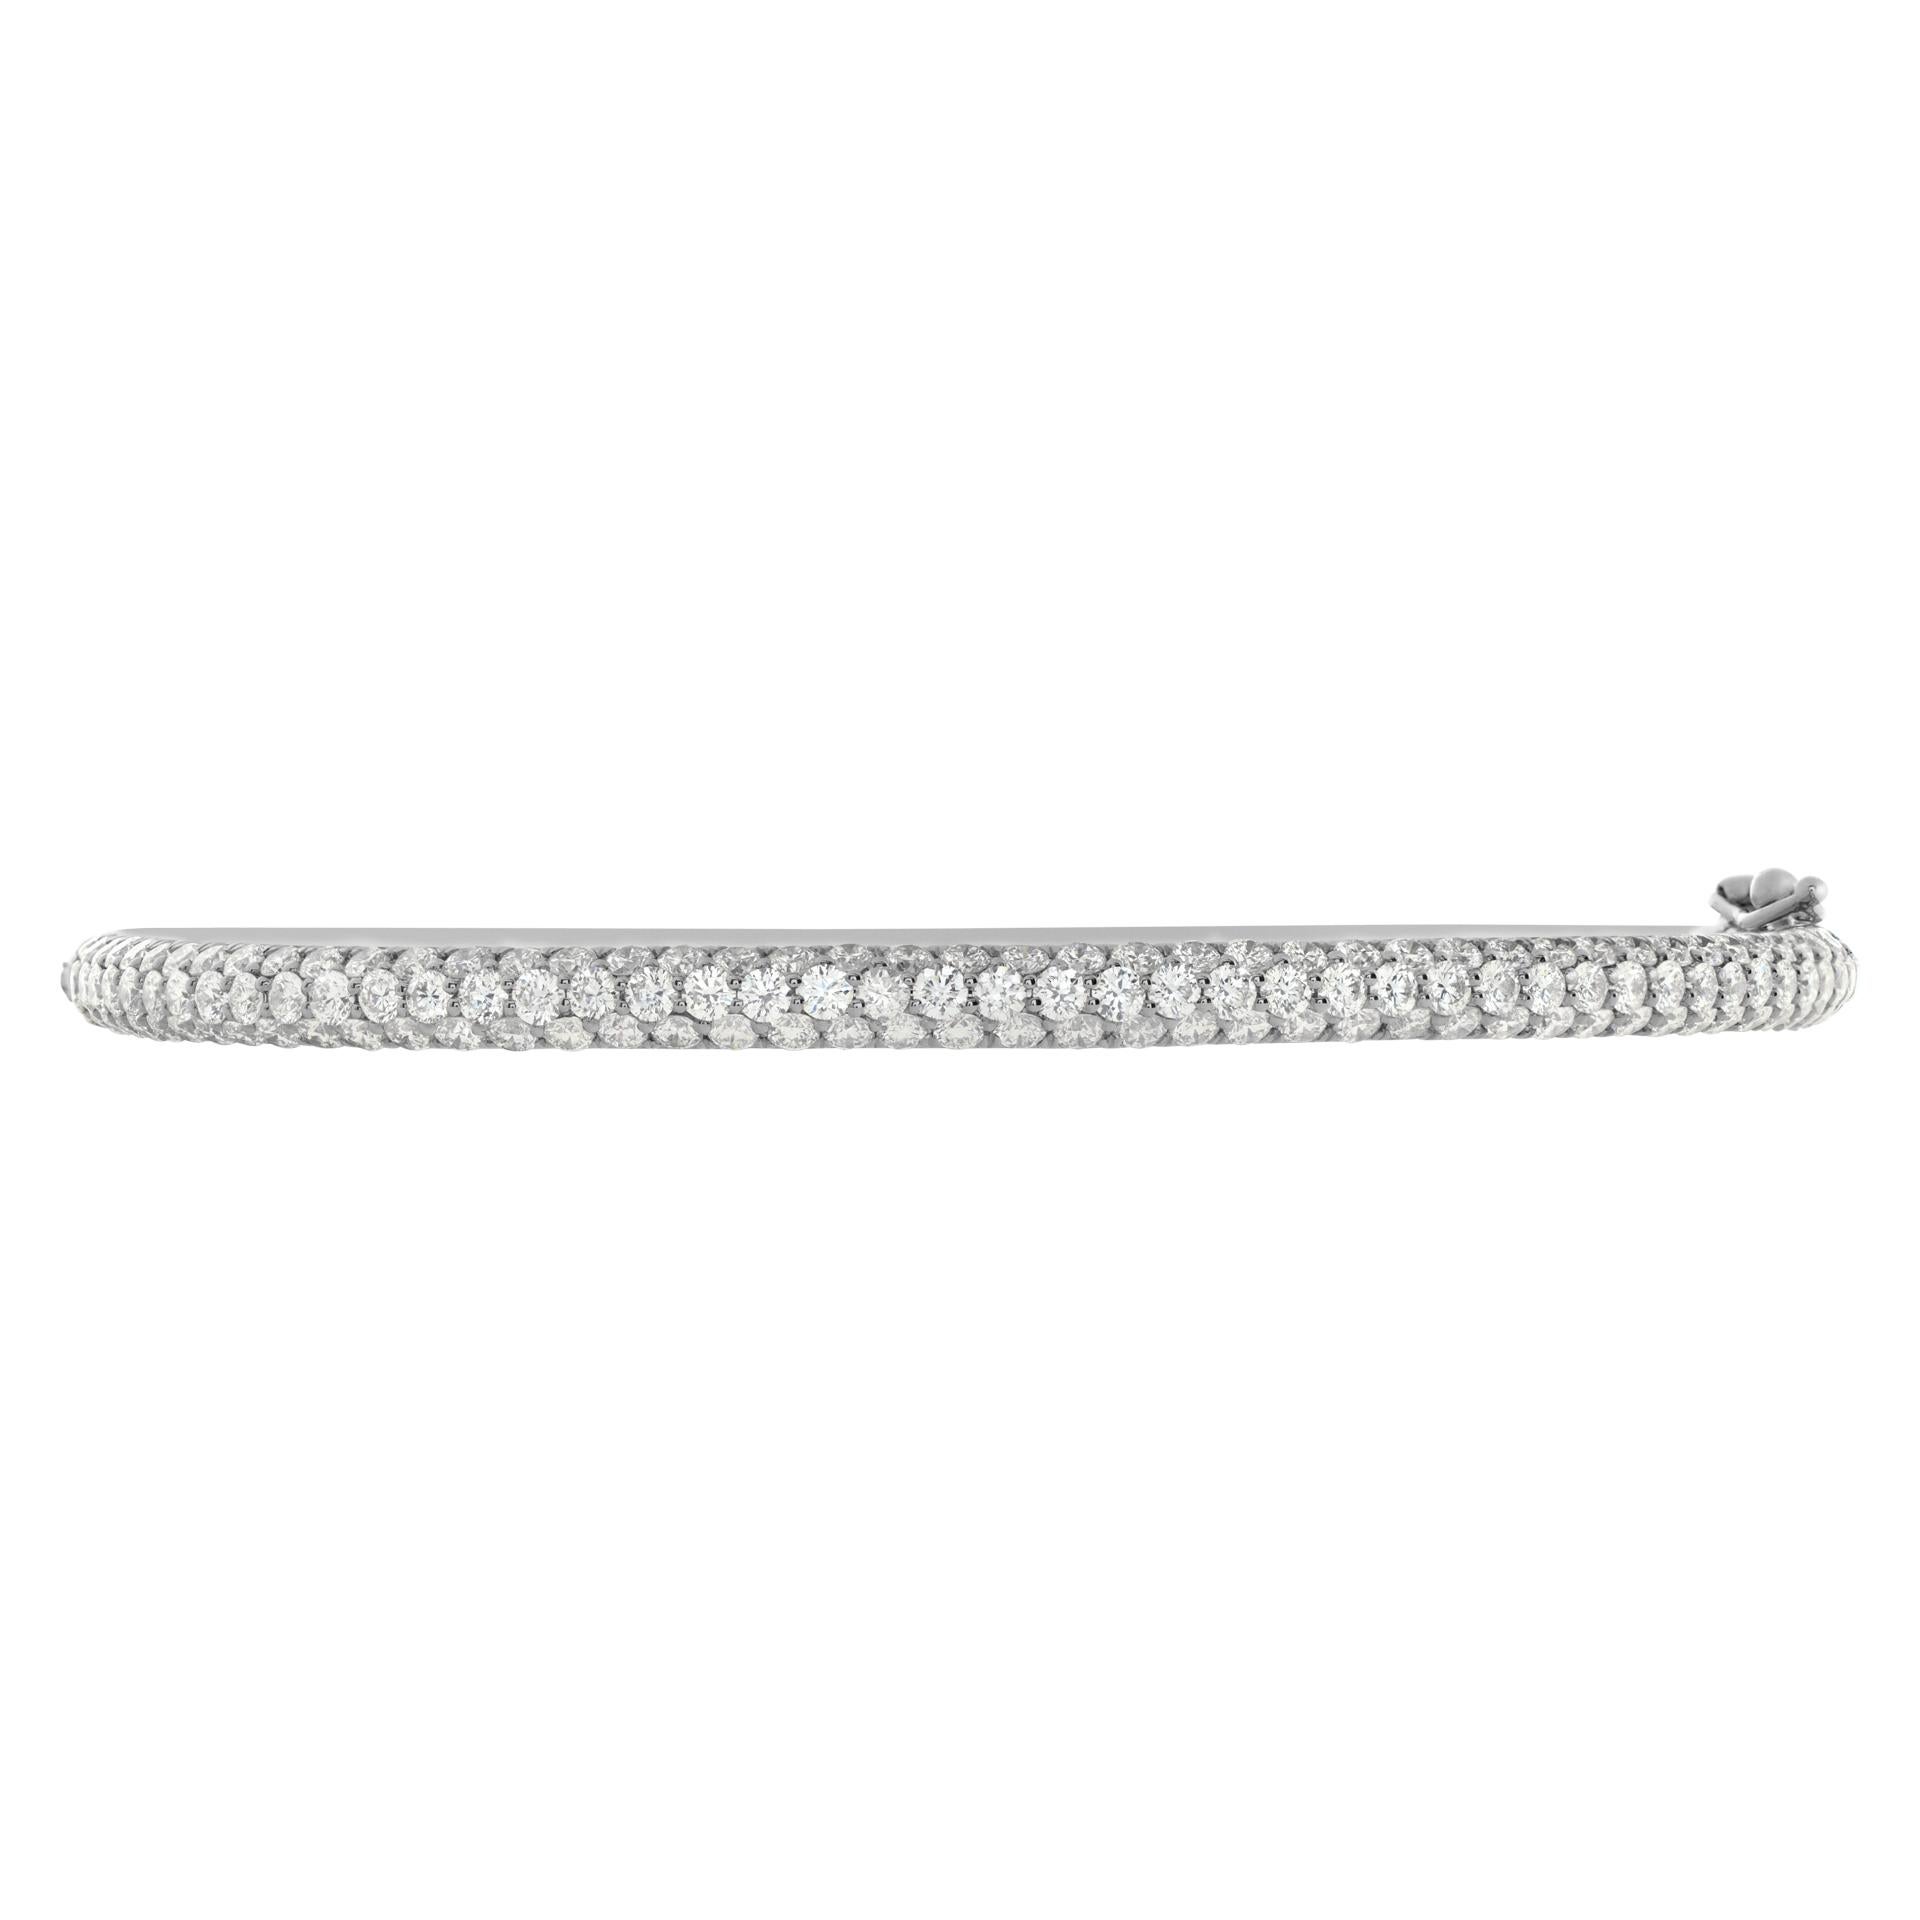 Timeless semi-eternity pave diamond bangle with 2.86 carats in brilliant round cut pave diamonds set in 18k white gold. Fits wrists up to 7.5'', width 3mm.
